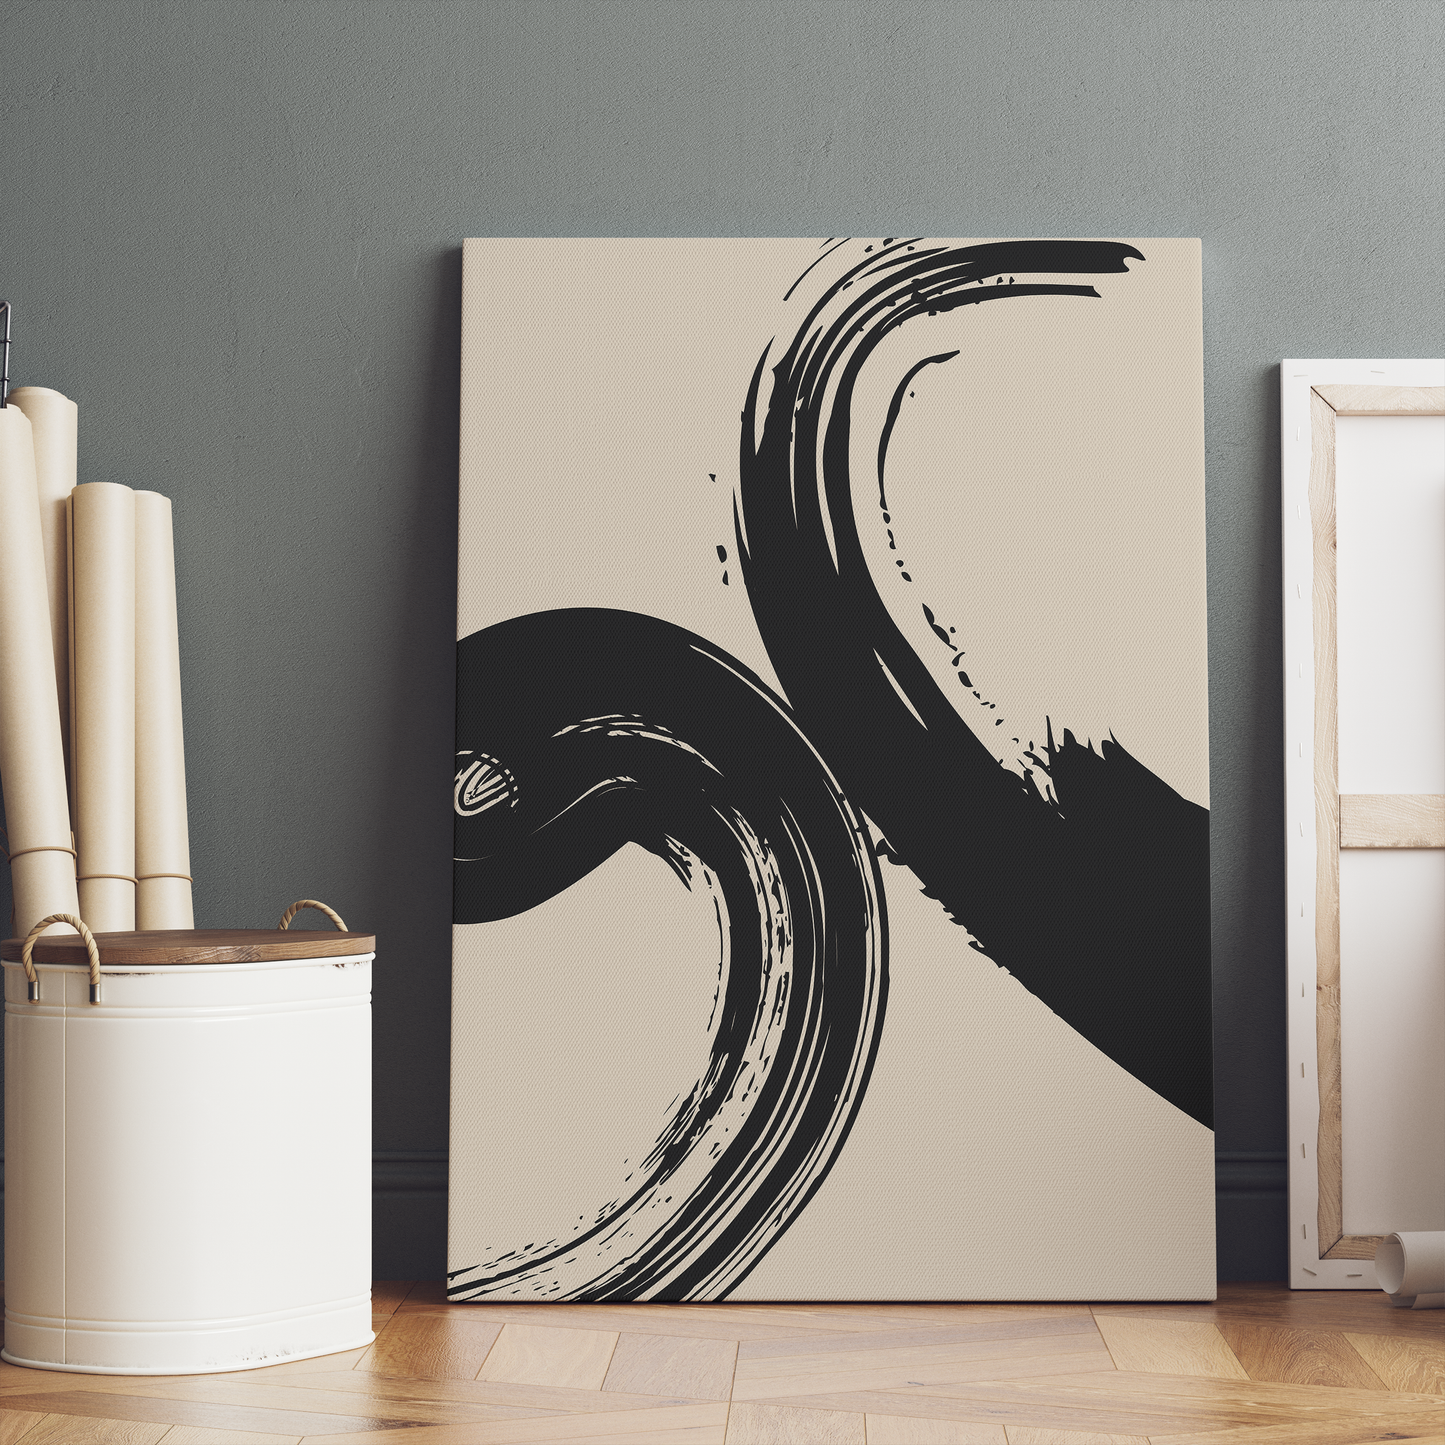 Painted Black Brushes Canvas Print